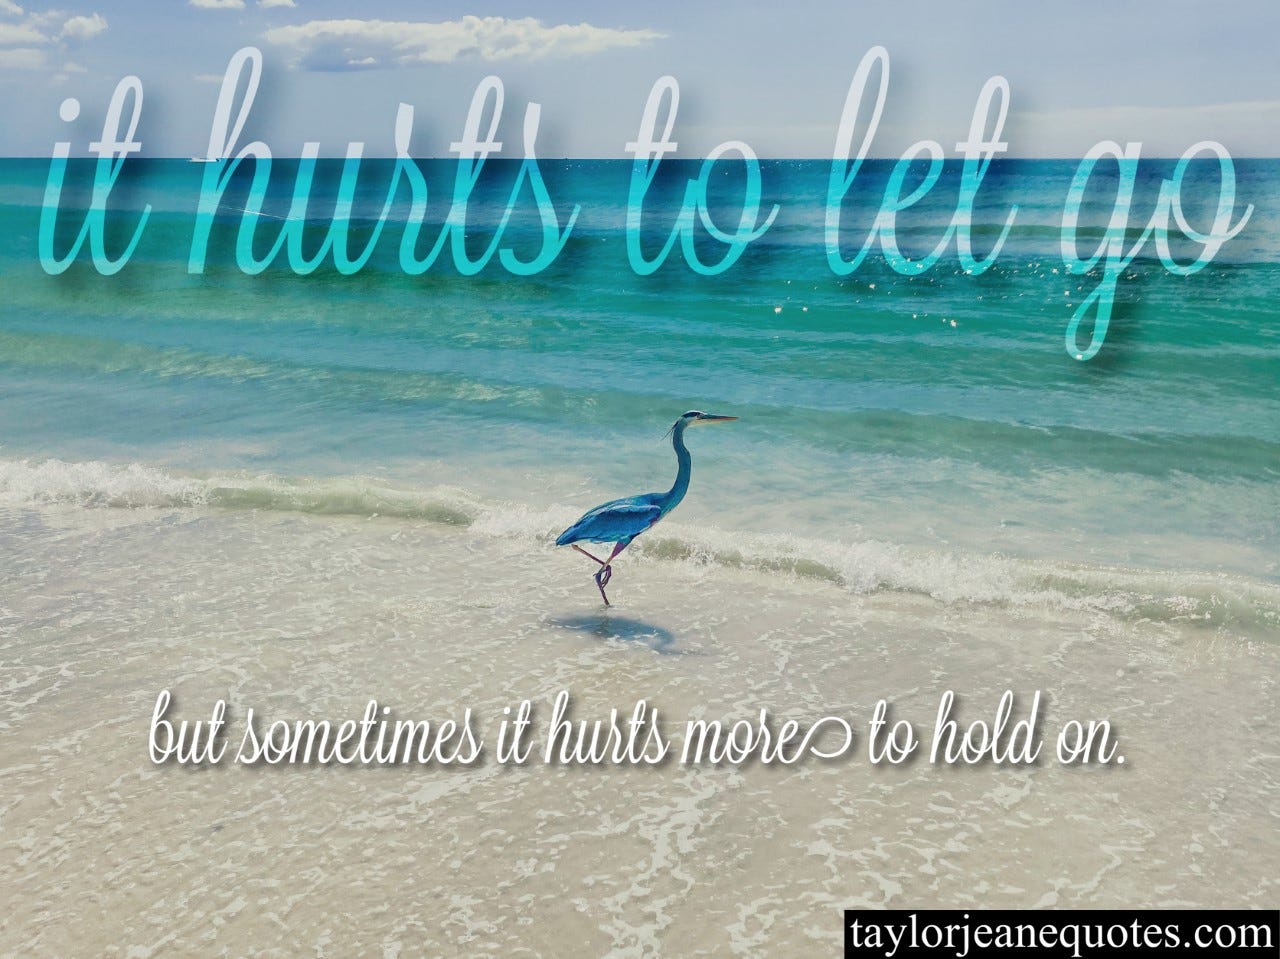 taylor jeane quotes, taylor jeane, taylor wilson, taylor wilson quotes, let go quotes, letting go quotes, sad quotes, anna maria island, beach, herron, herron on beach, sad quotes, sentimental quotes, memory quotes, hold on quotes, holding on quotes, life quotes, love quotes, breakup quotes, change quotes, moving on quotes, move on quotes, chapter quotes, ending quotes, daily quotes